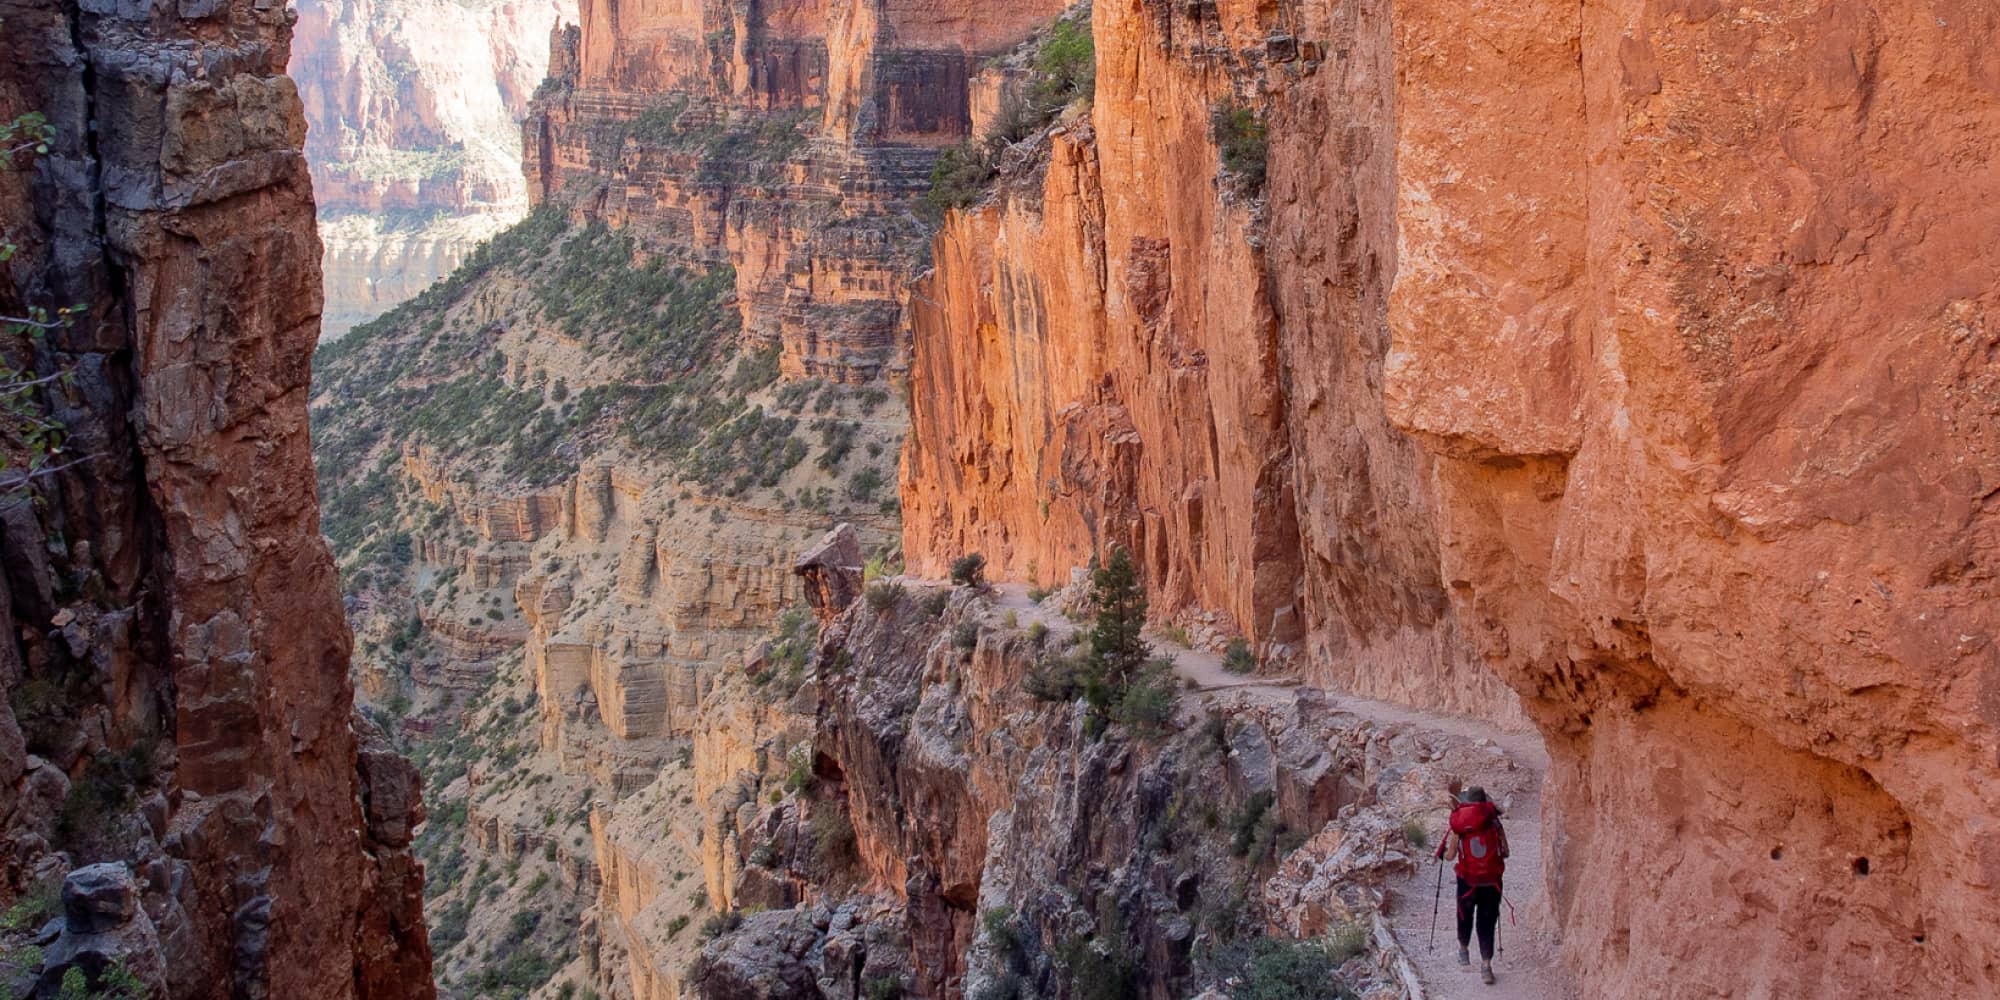 A backpacker hiking in the Grand Canyon. They are surounded by orange cliffs. A path is carved in the side of the cliff on which the backpacker is traveling.